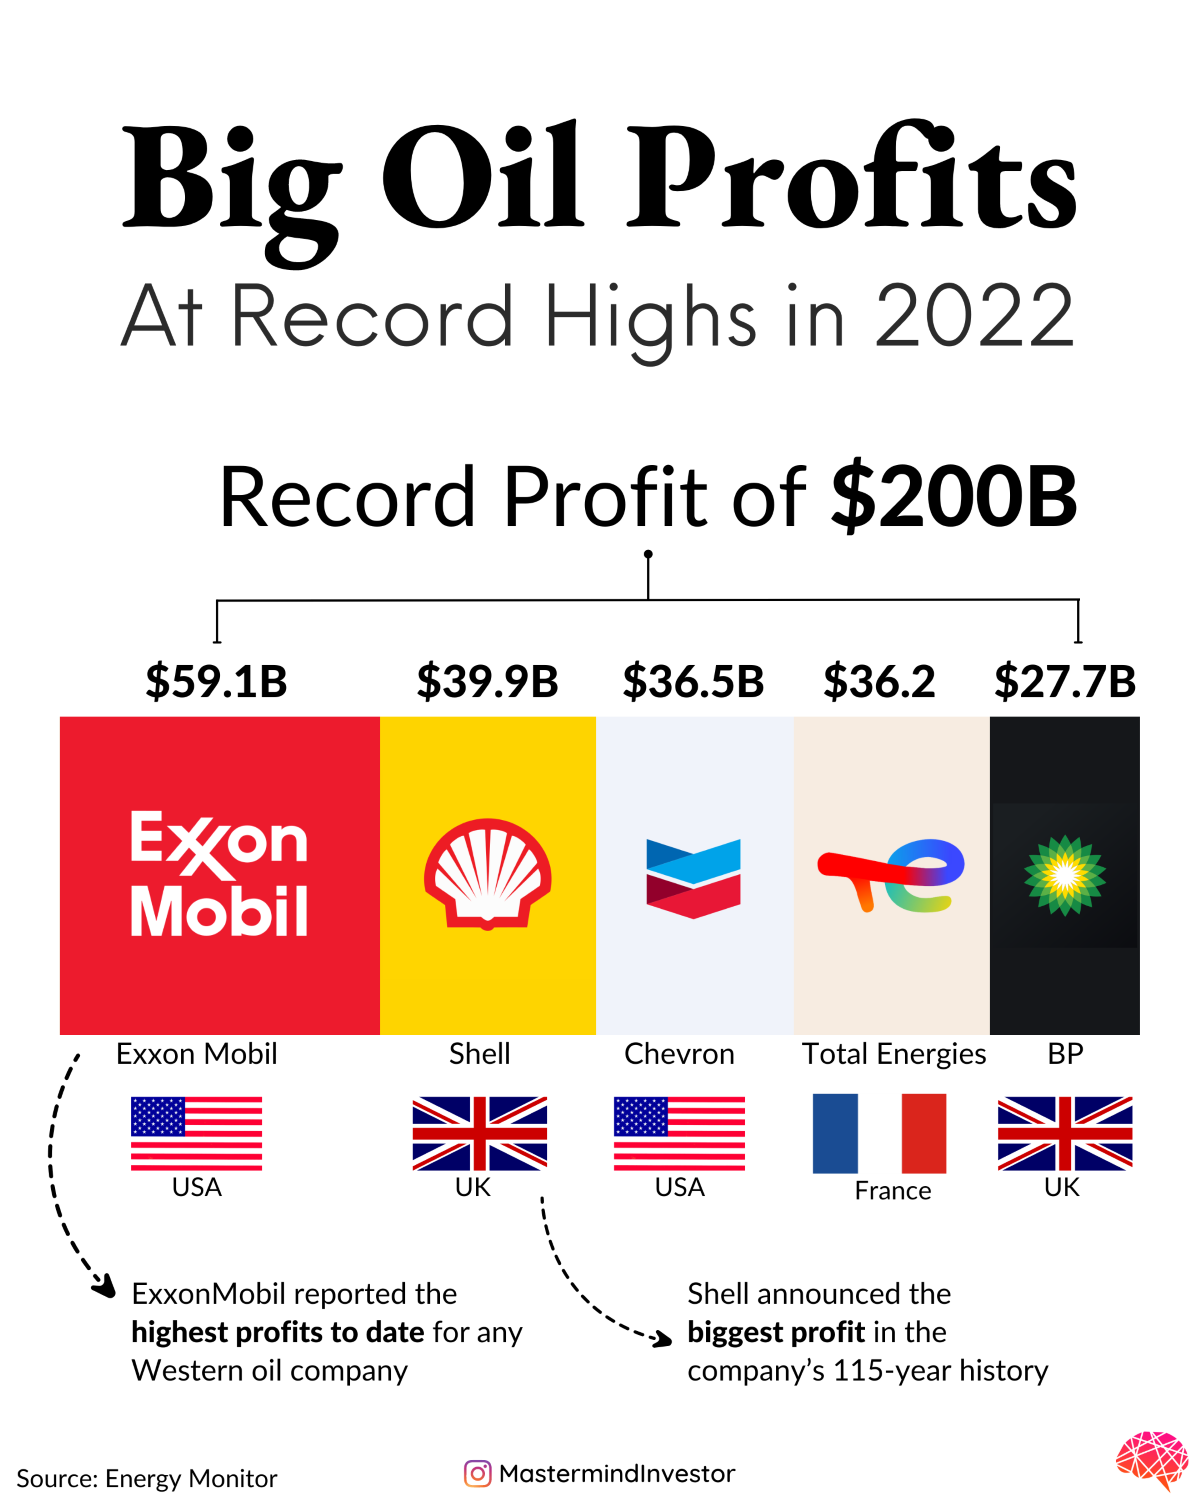 Big Oil Profits Reached Record High Levels in 2022